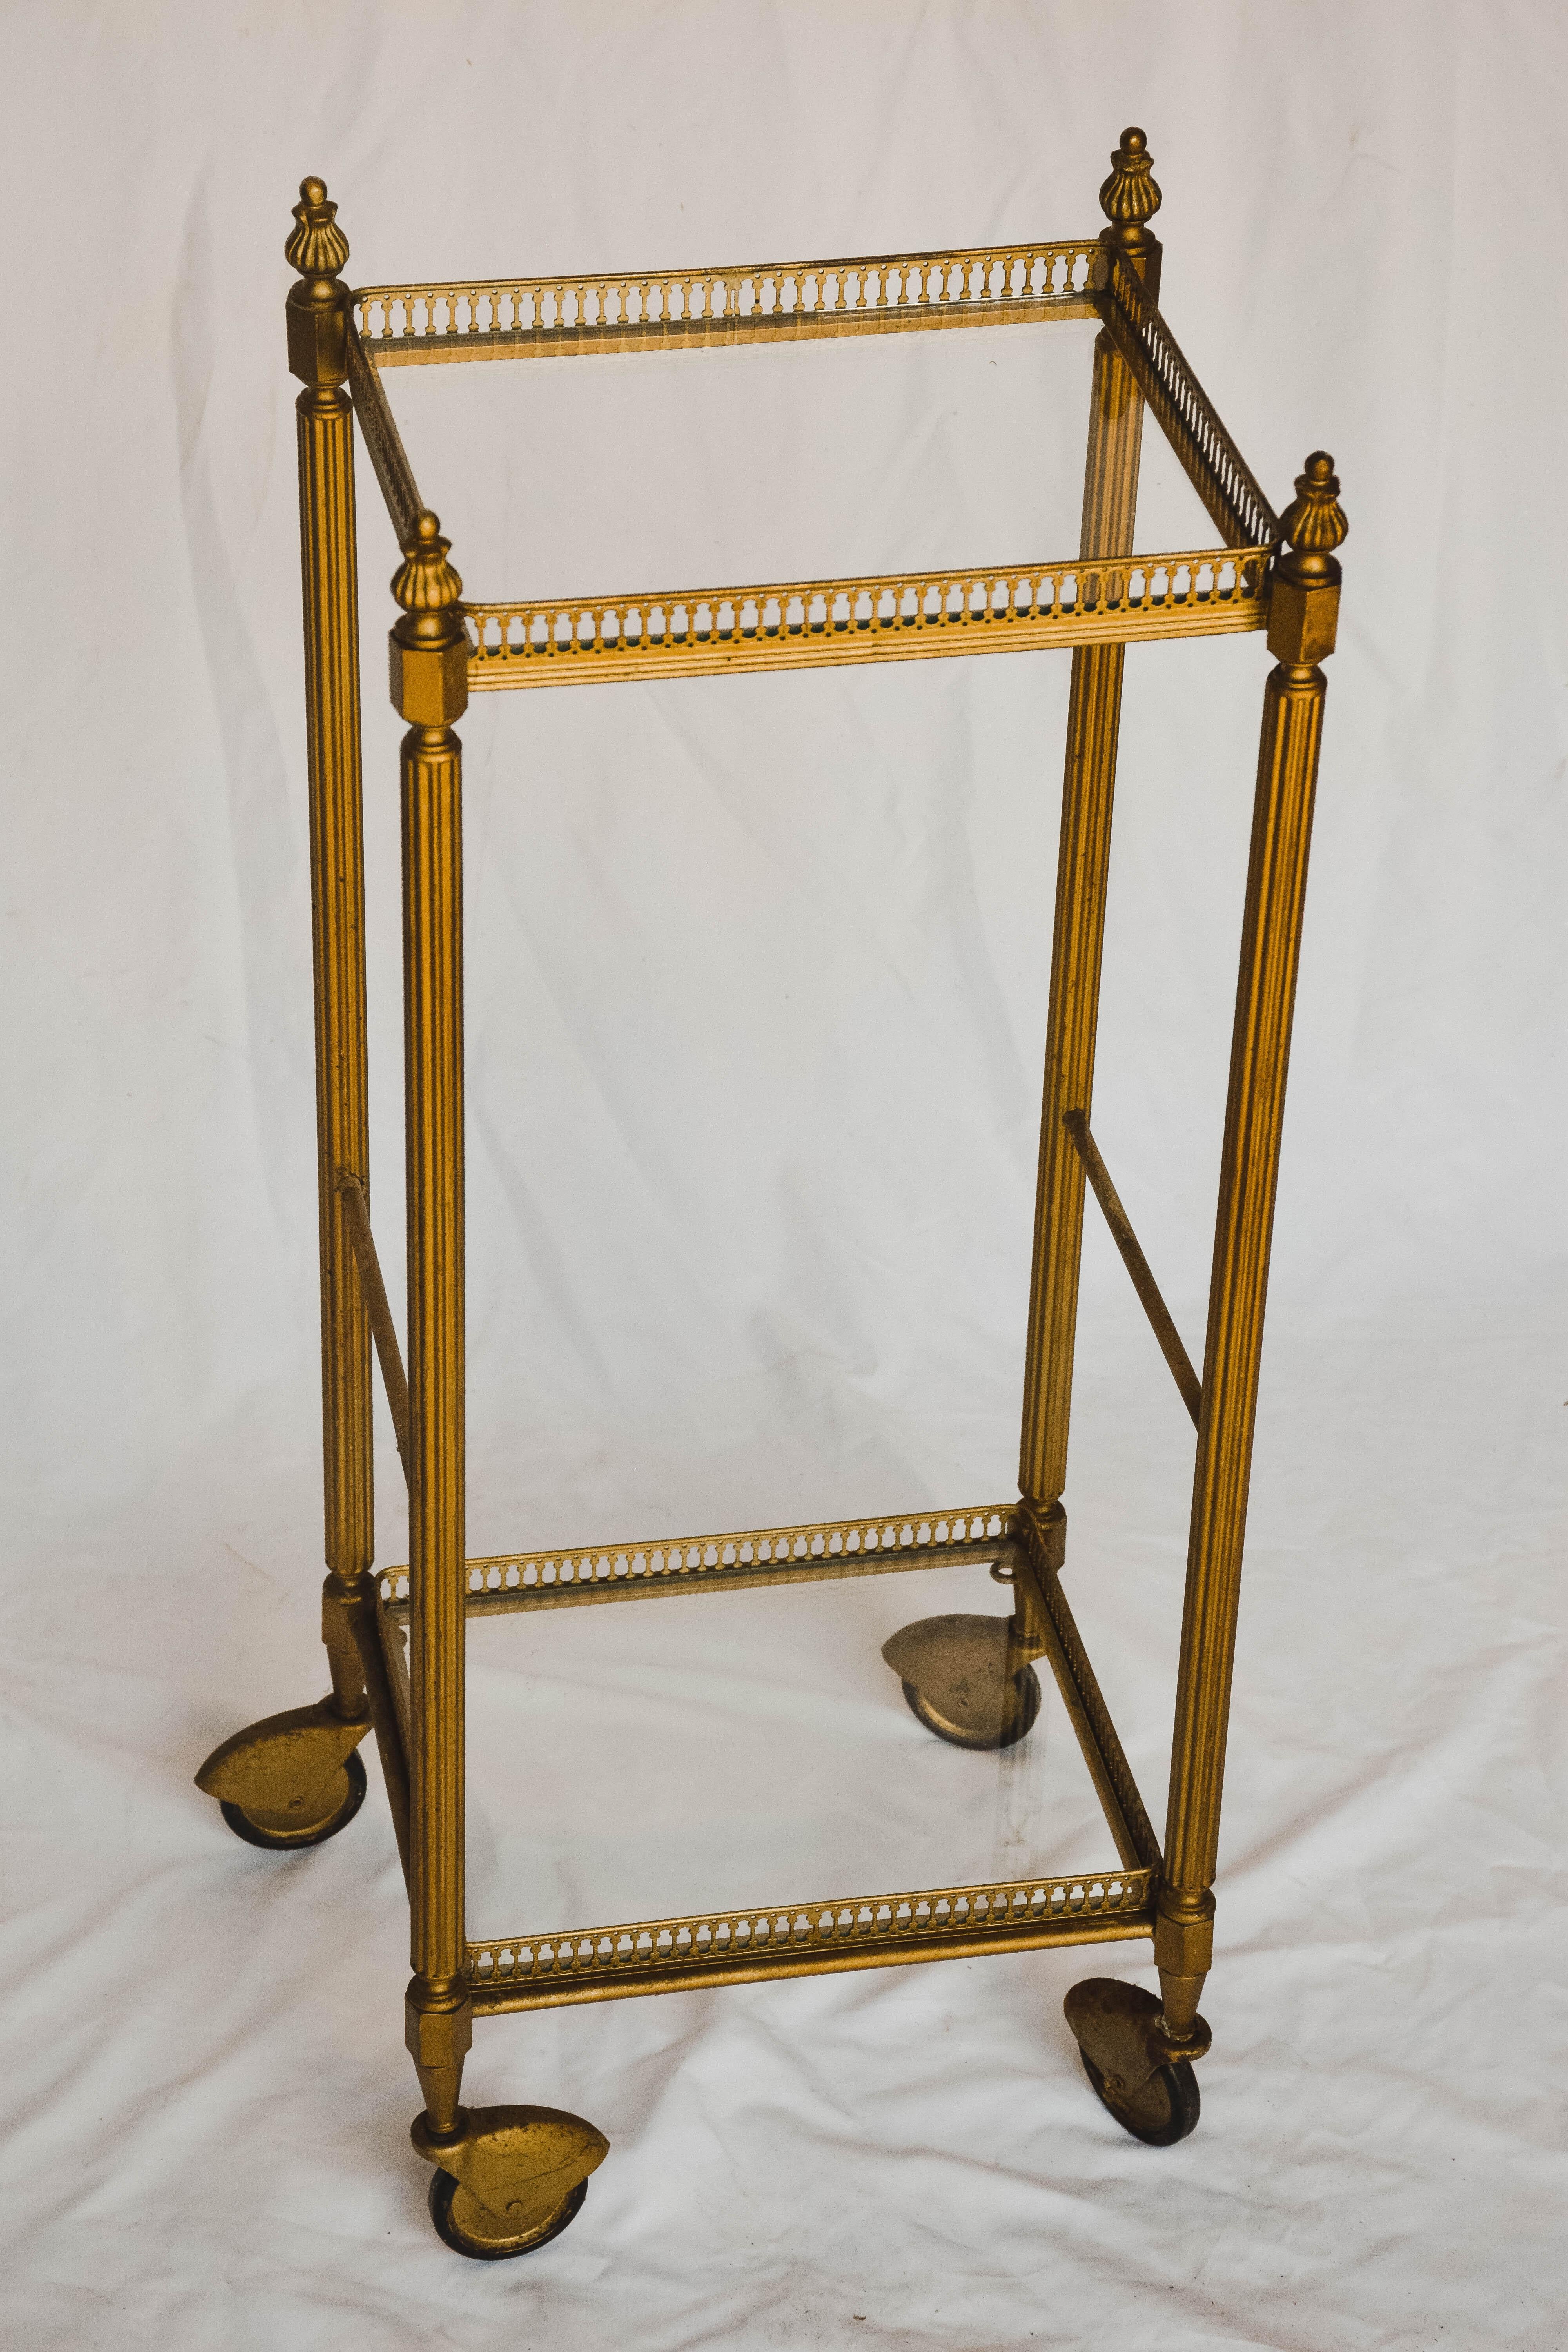 This Mid-Century Modern bar cart is sure to delight. Constructed of brass and glass bringing beauty to the midcentury design. The two glass tiers provides ample space for all your bar needs. It's unusual size would work well as a side table in a